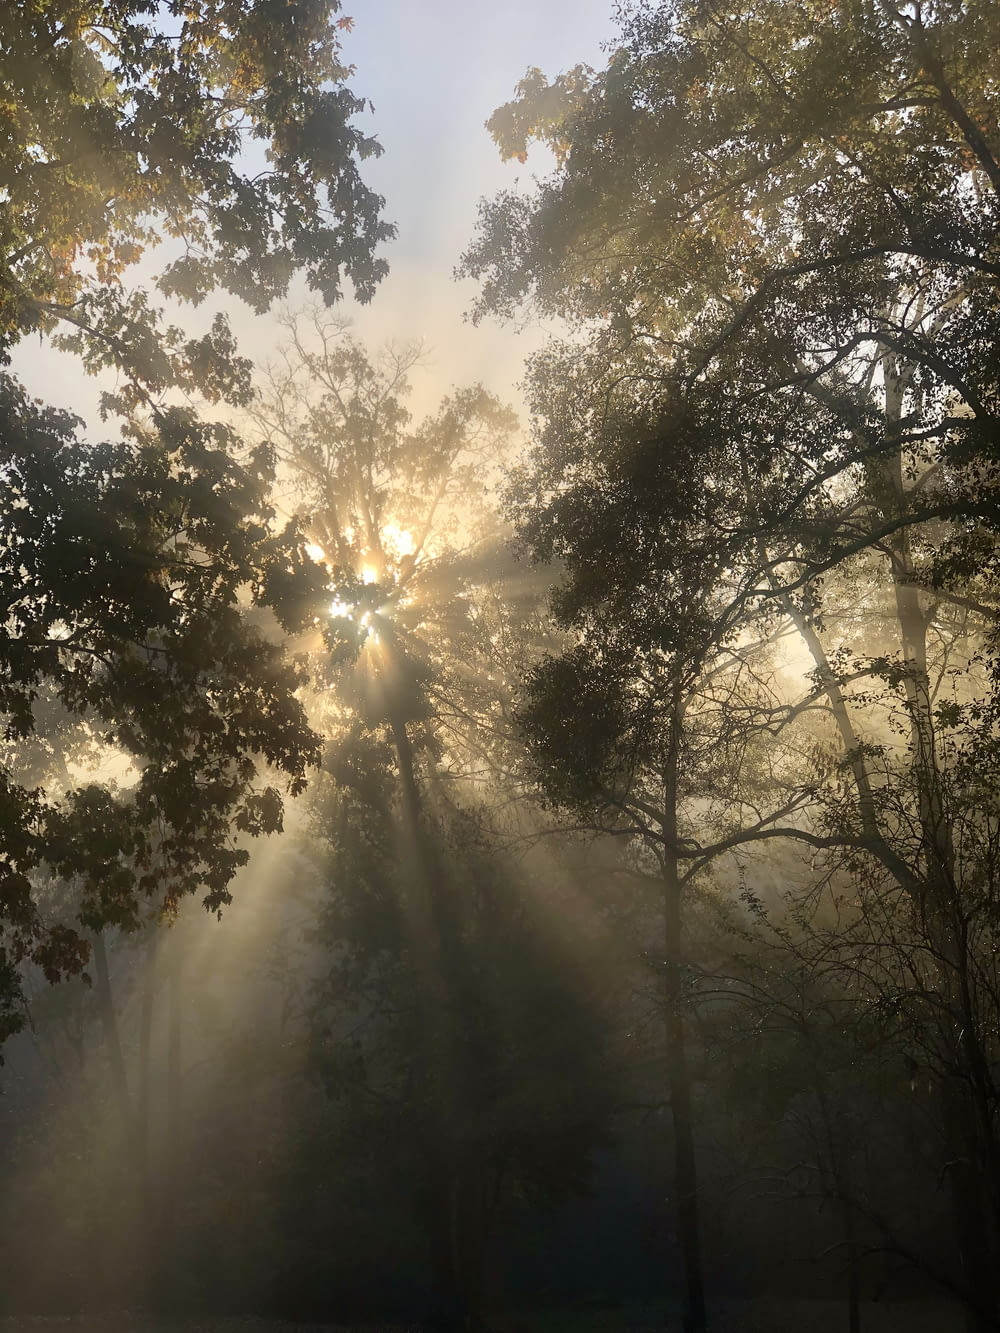 the sun shines through the trees in a foggy forest